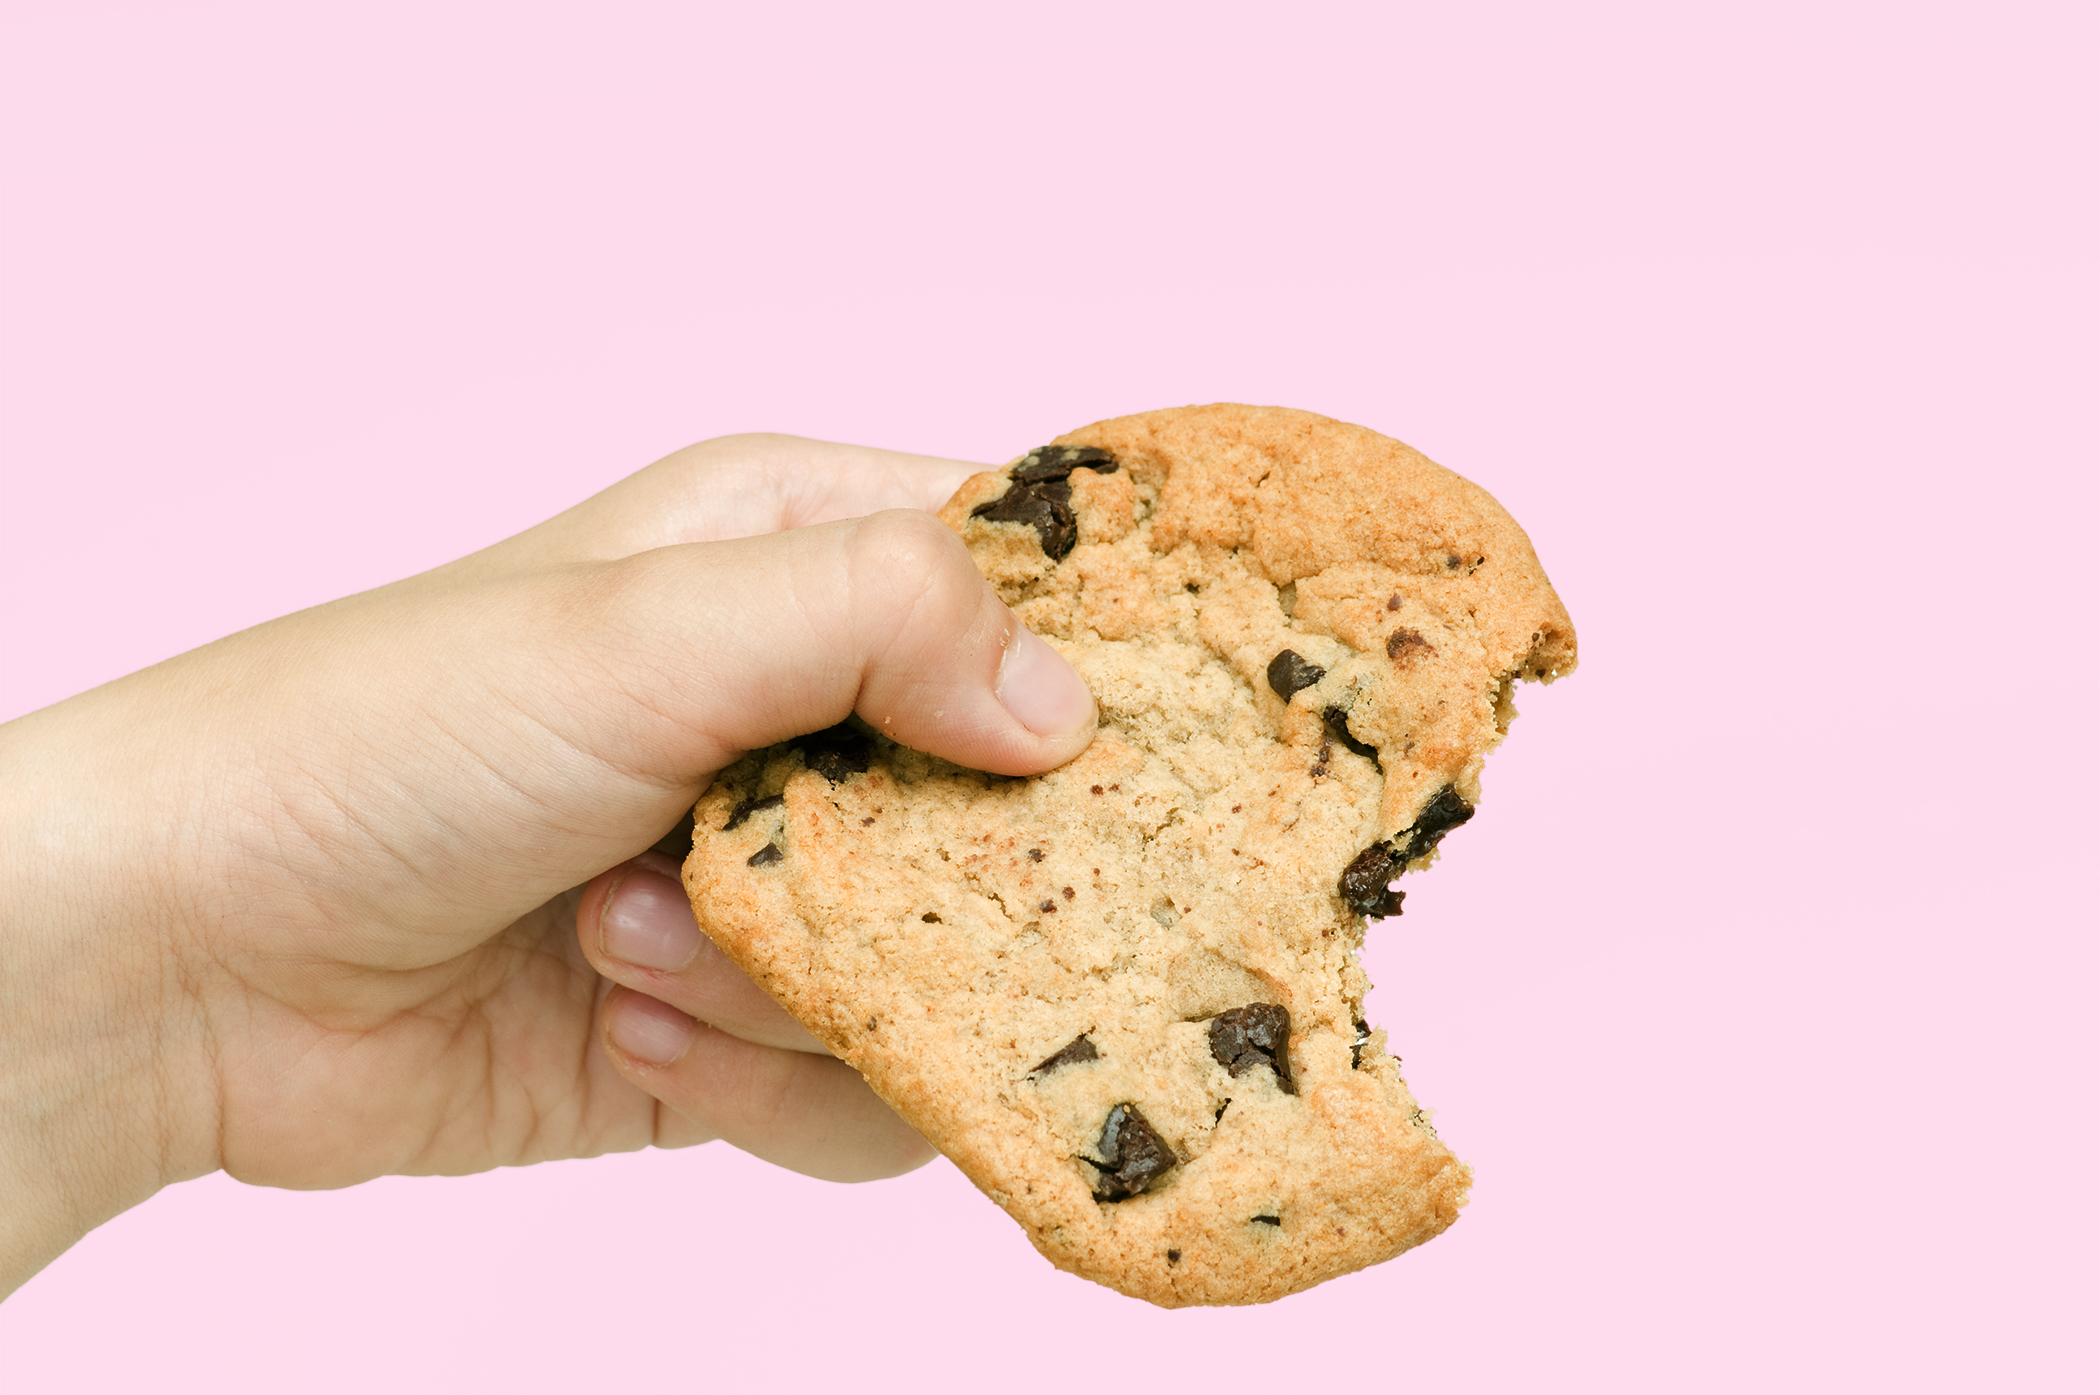 AITA Husband Questions - giving cookie